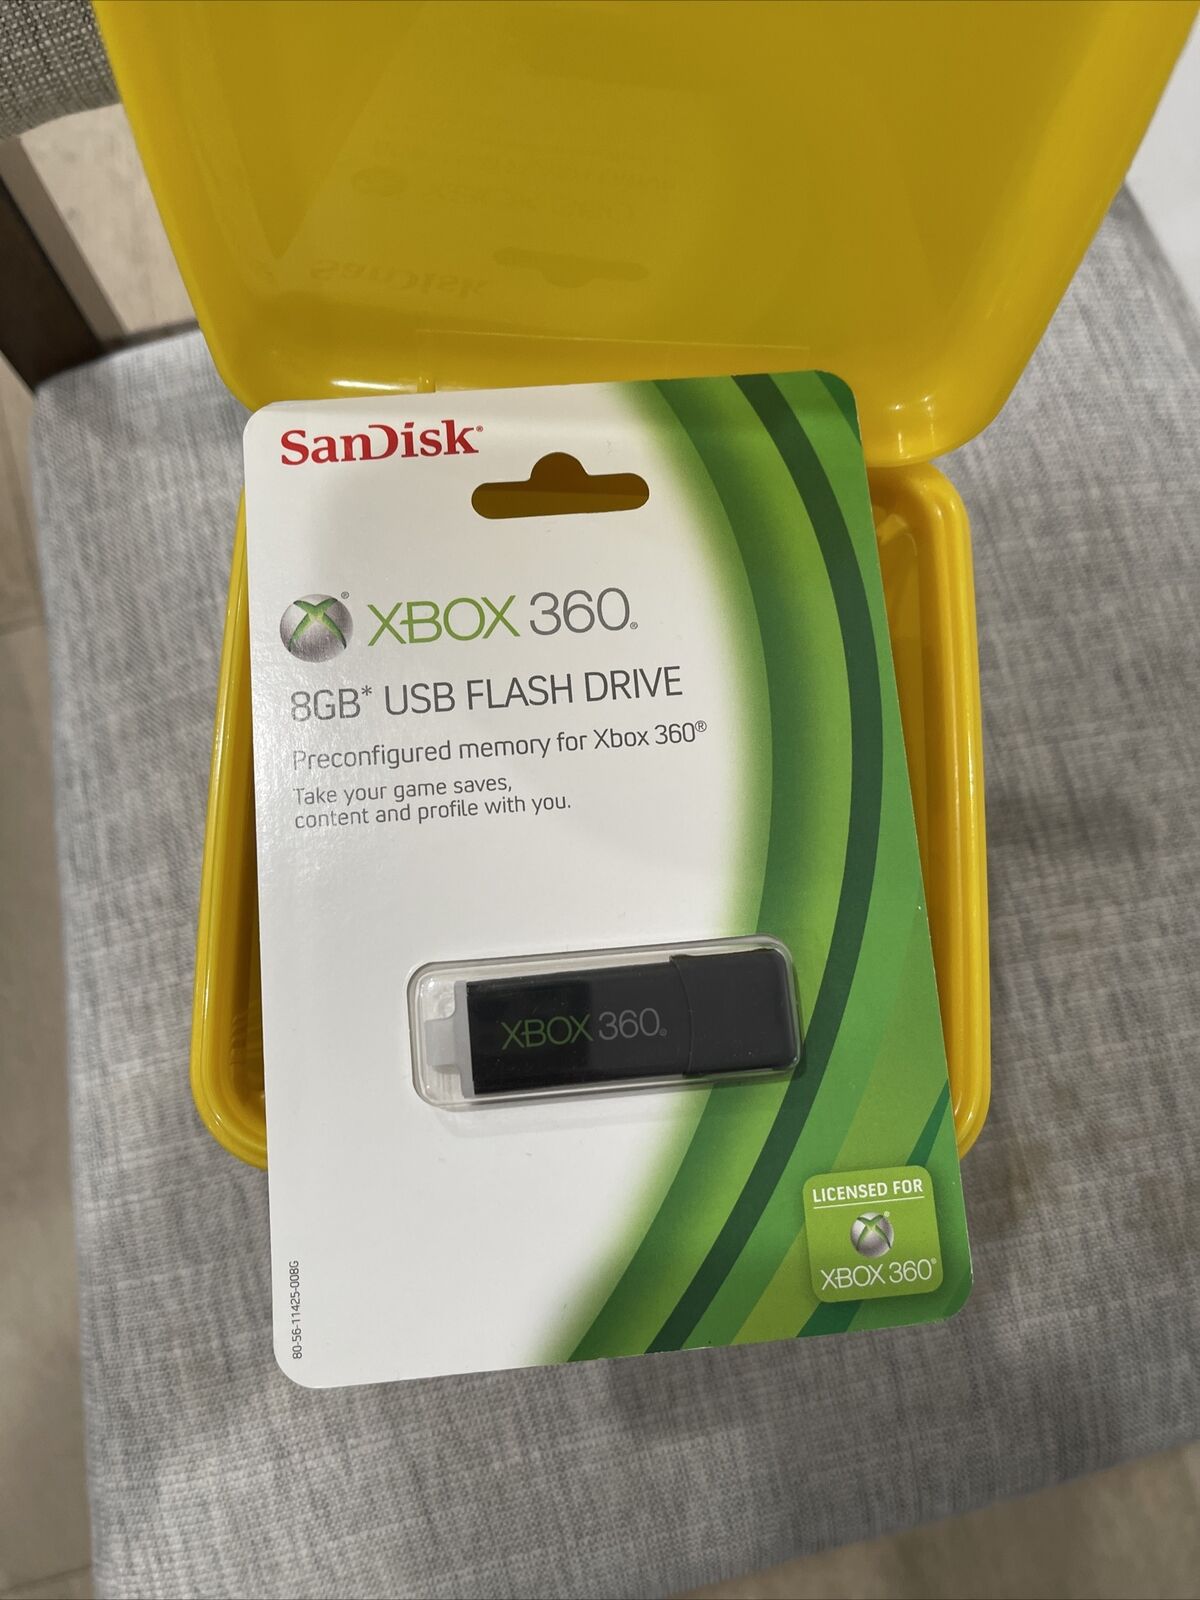 SanDisk USB FLASH DRIVE 8GB For XBOX 360 Brand NEW & Sealed Official